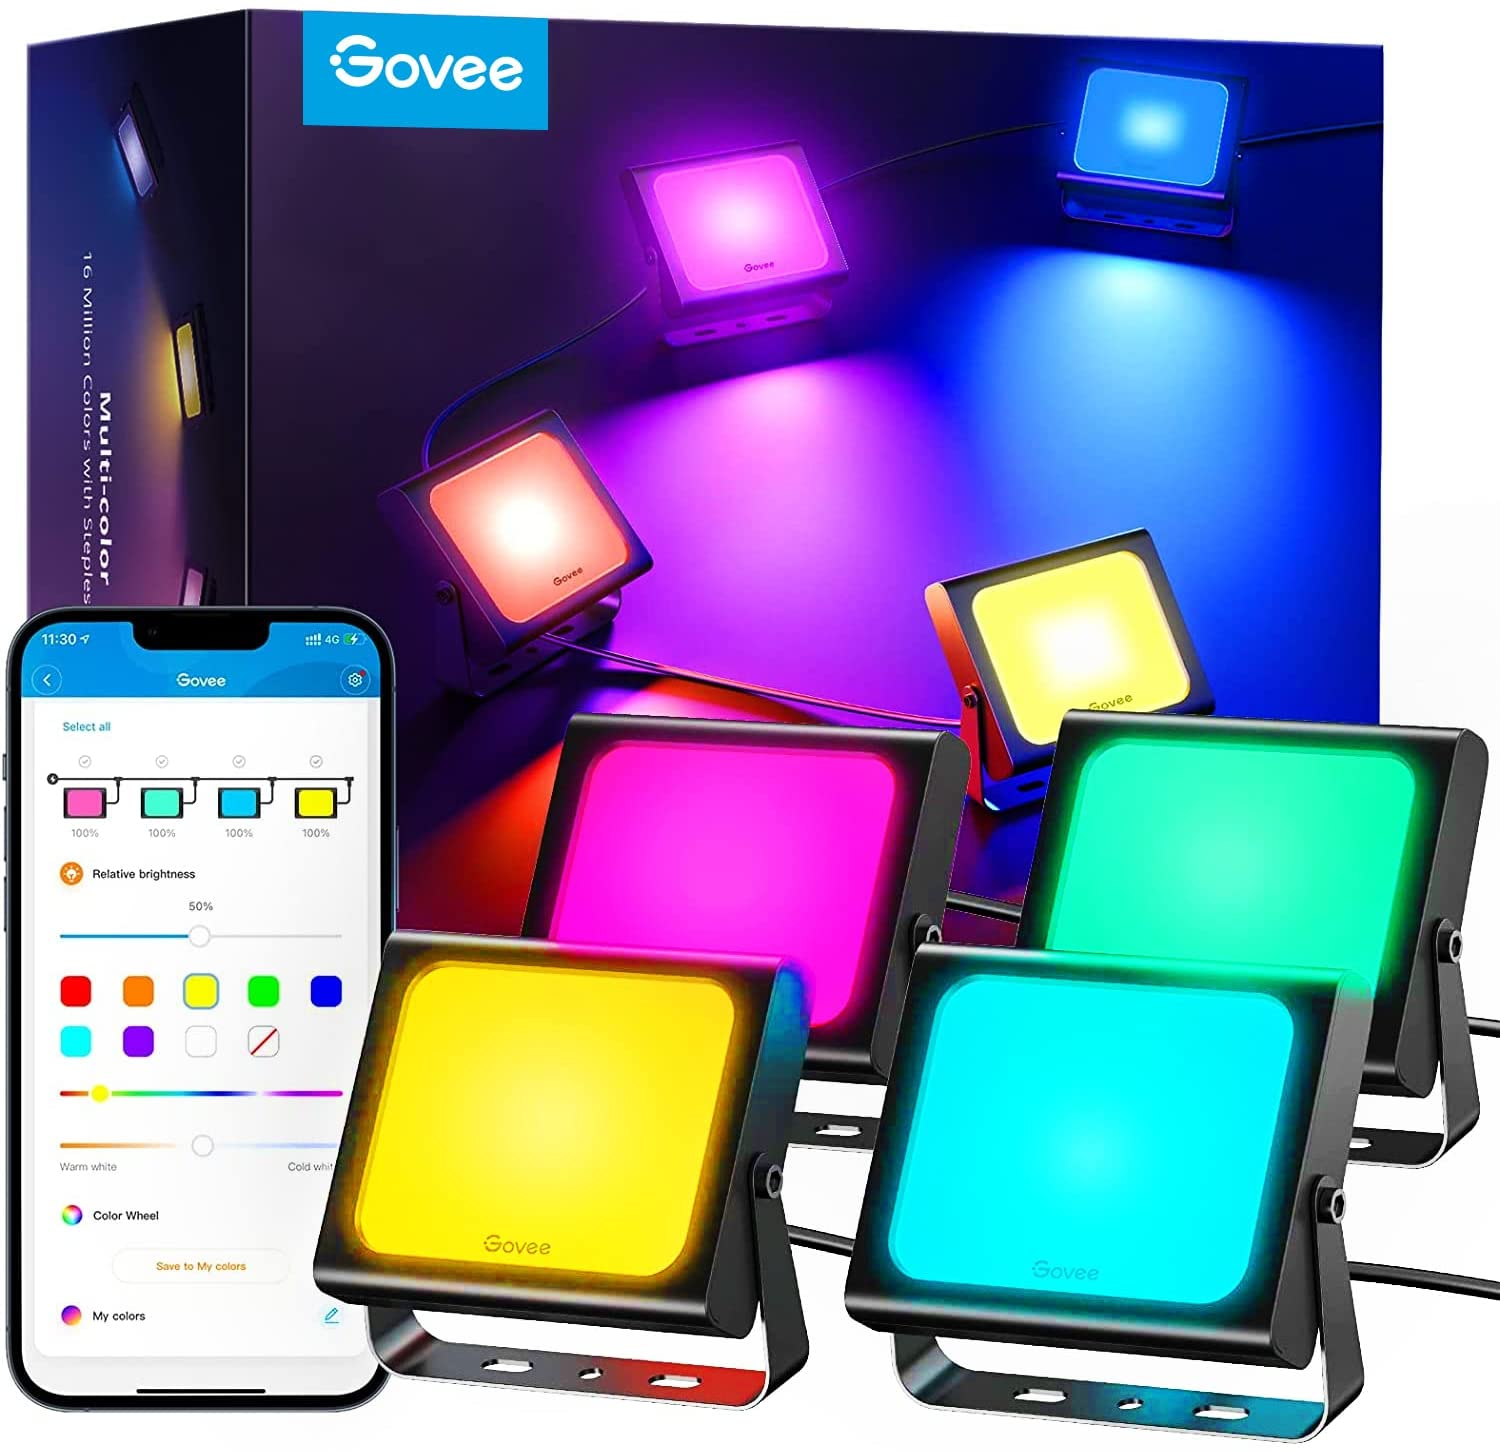 Outdoor Govee LED Flood Lights, Smart Stage Lights with 28 Scene Modes and 4 Music Modes, 500lm 6W per RGBIC 2200-6500K $84.99